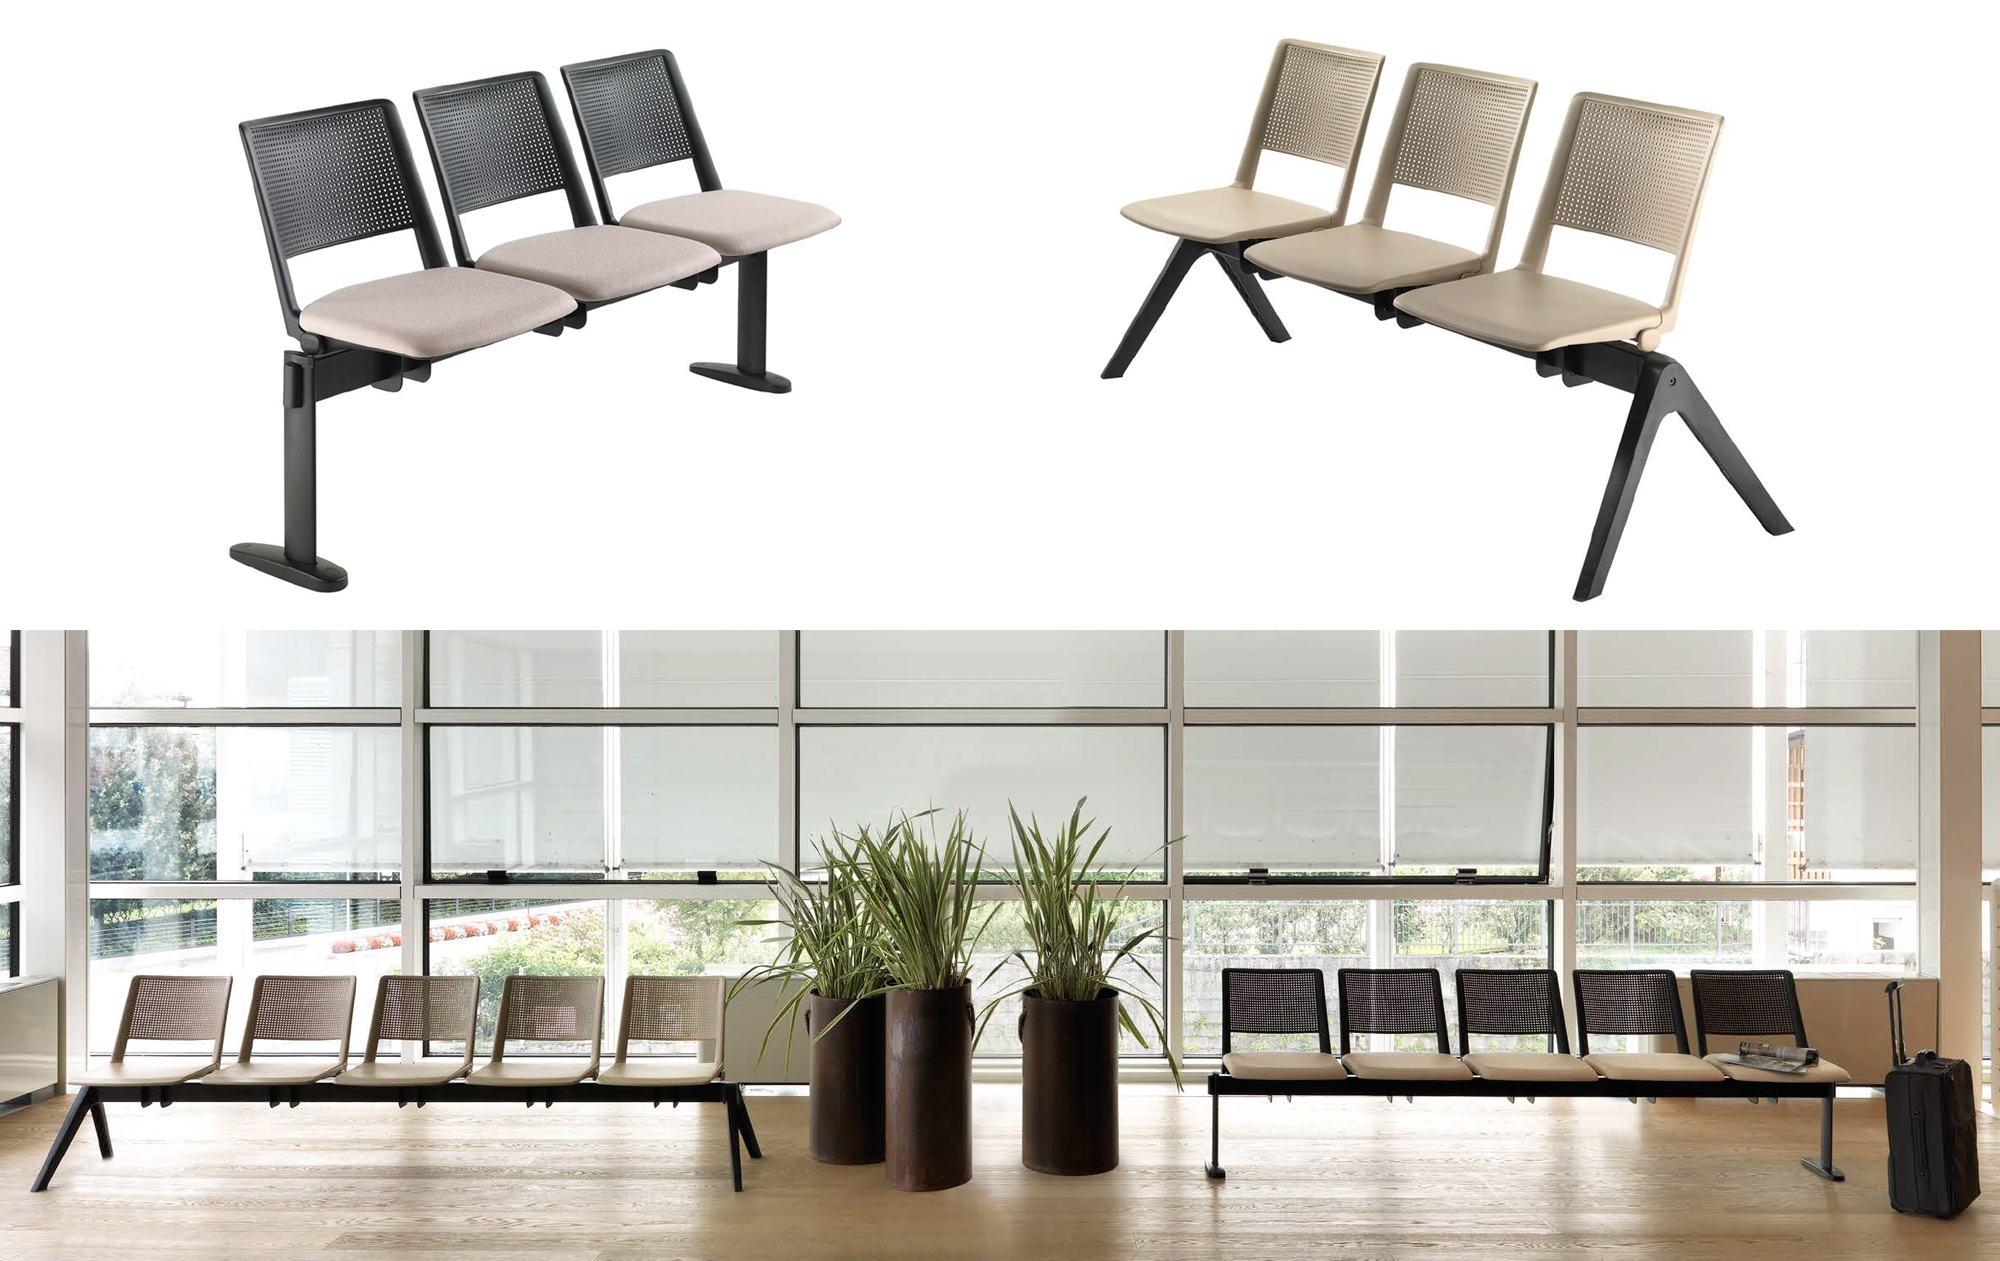 Revolution - Meeting, conference and waiting room chairs - Cerantola - 9